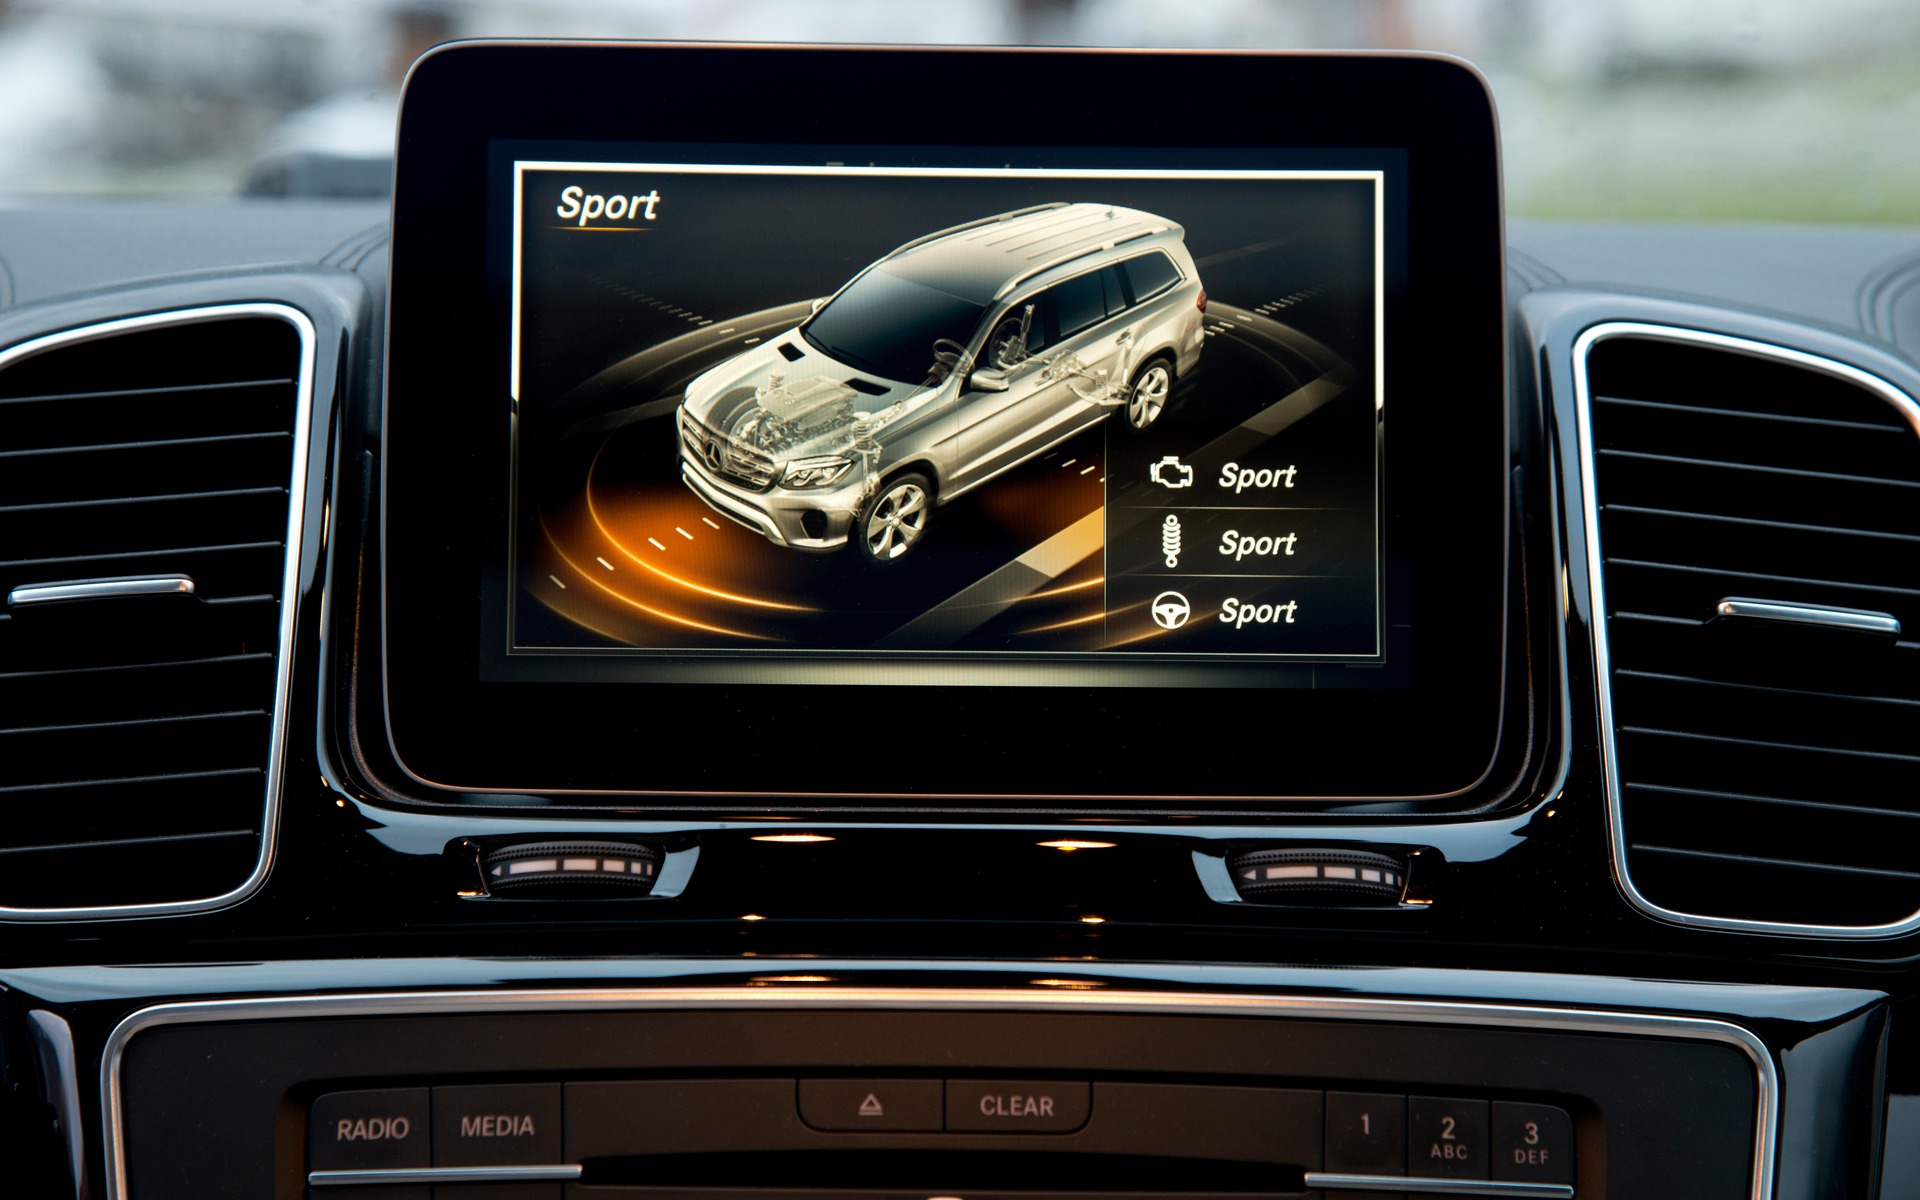 Each of the five drive modes are well explained on the infotainment screen